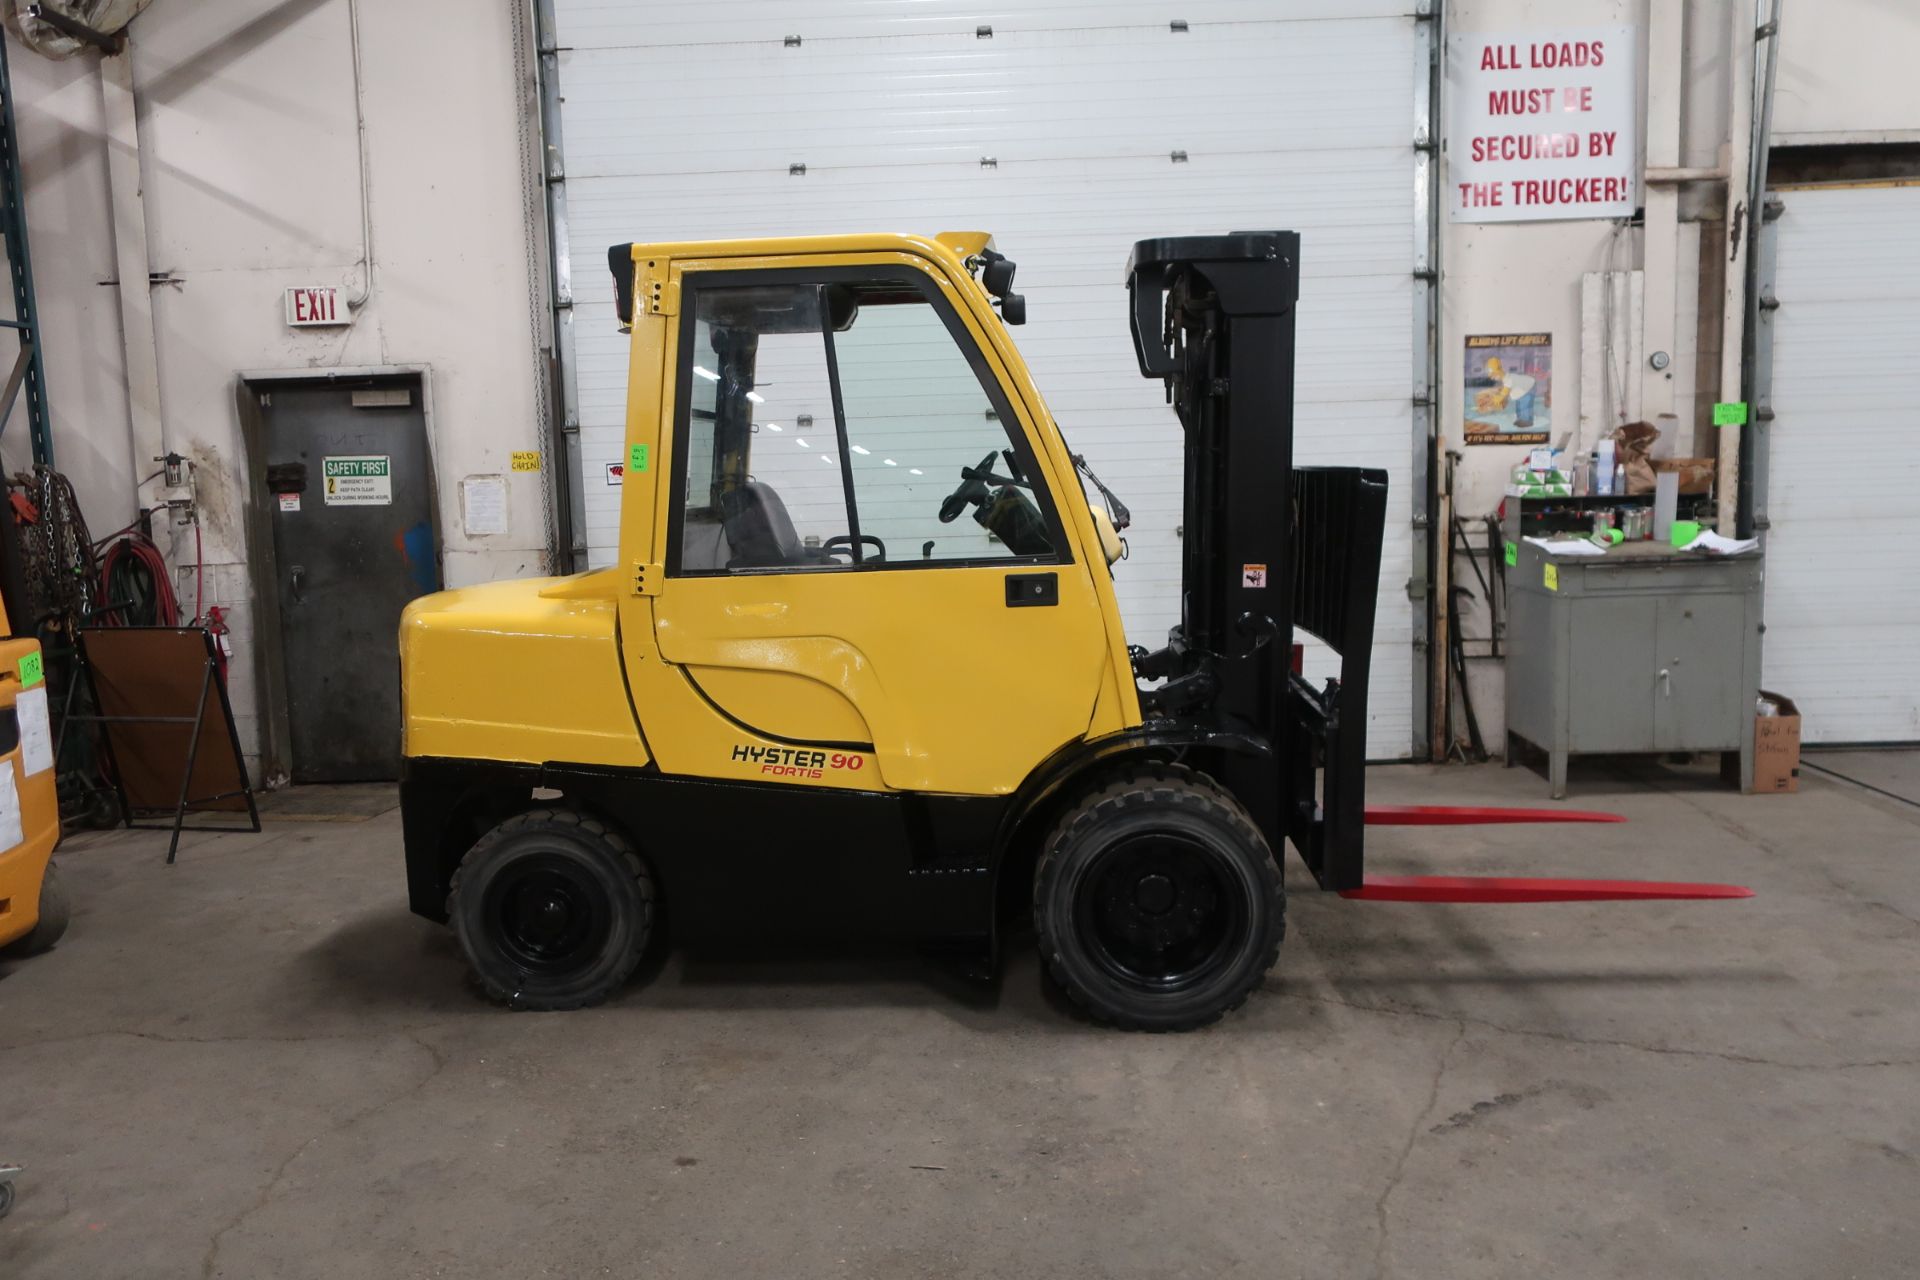 FREE CUSTOMS - 2007 Hyster 9,000lbs Capacity OUTDOOR Forklift Diesel DUAL FRONT TIRES and